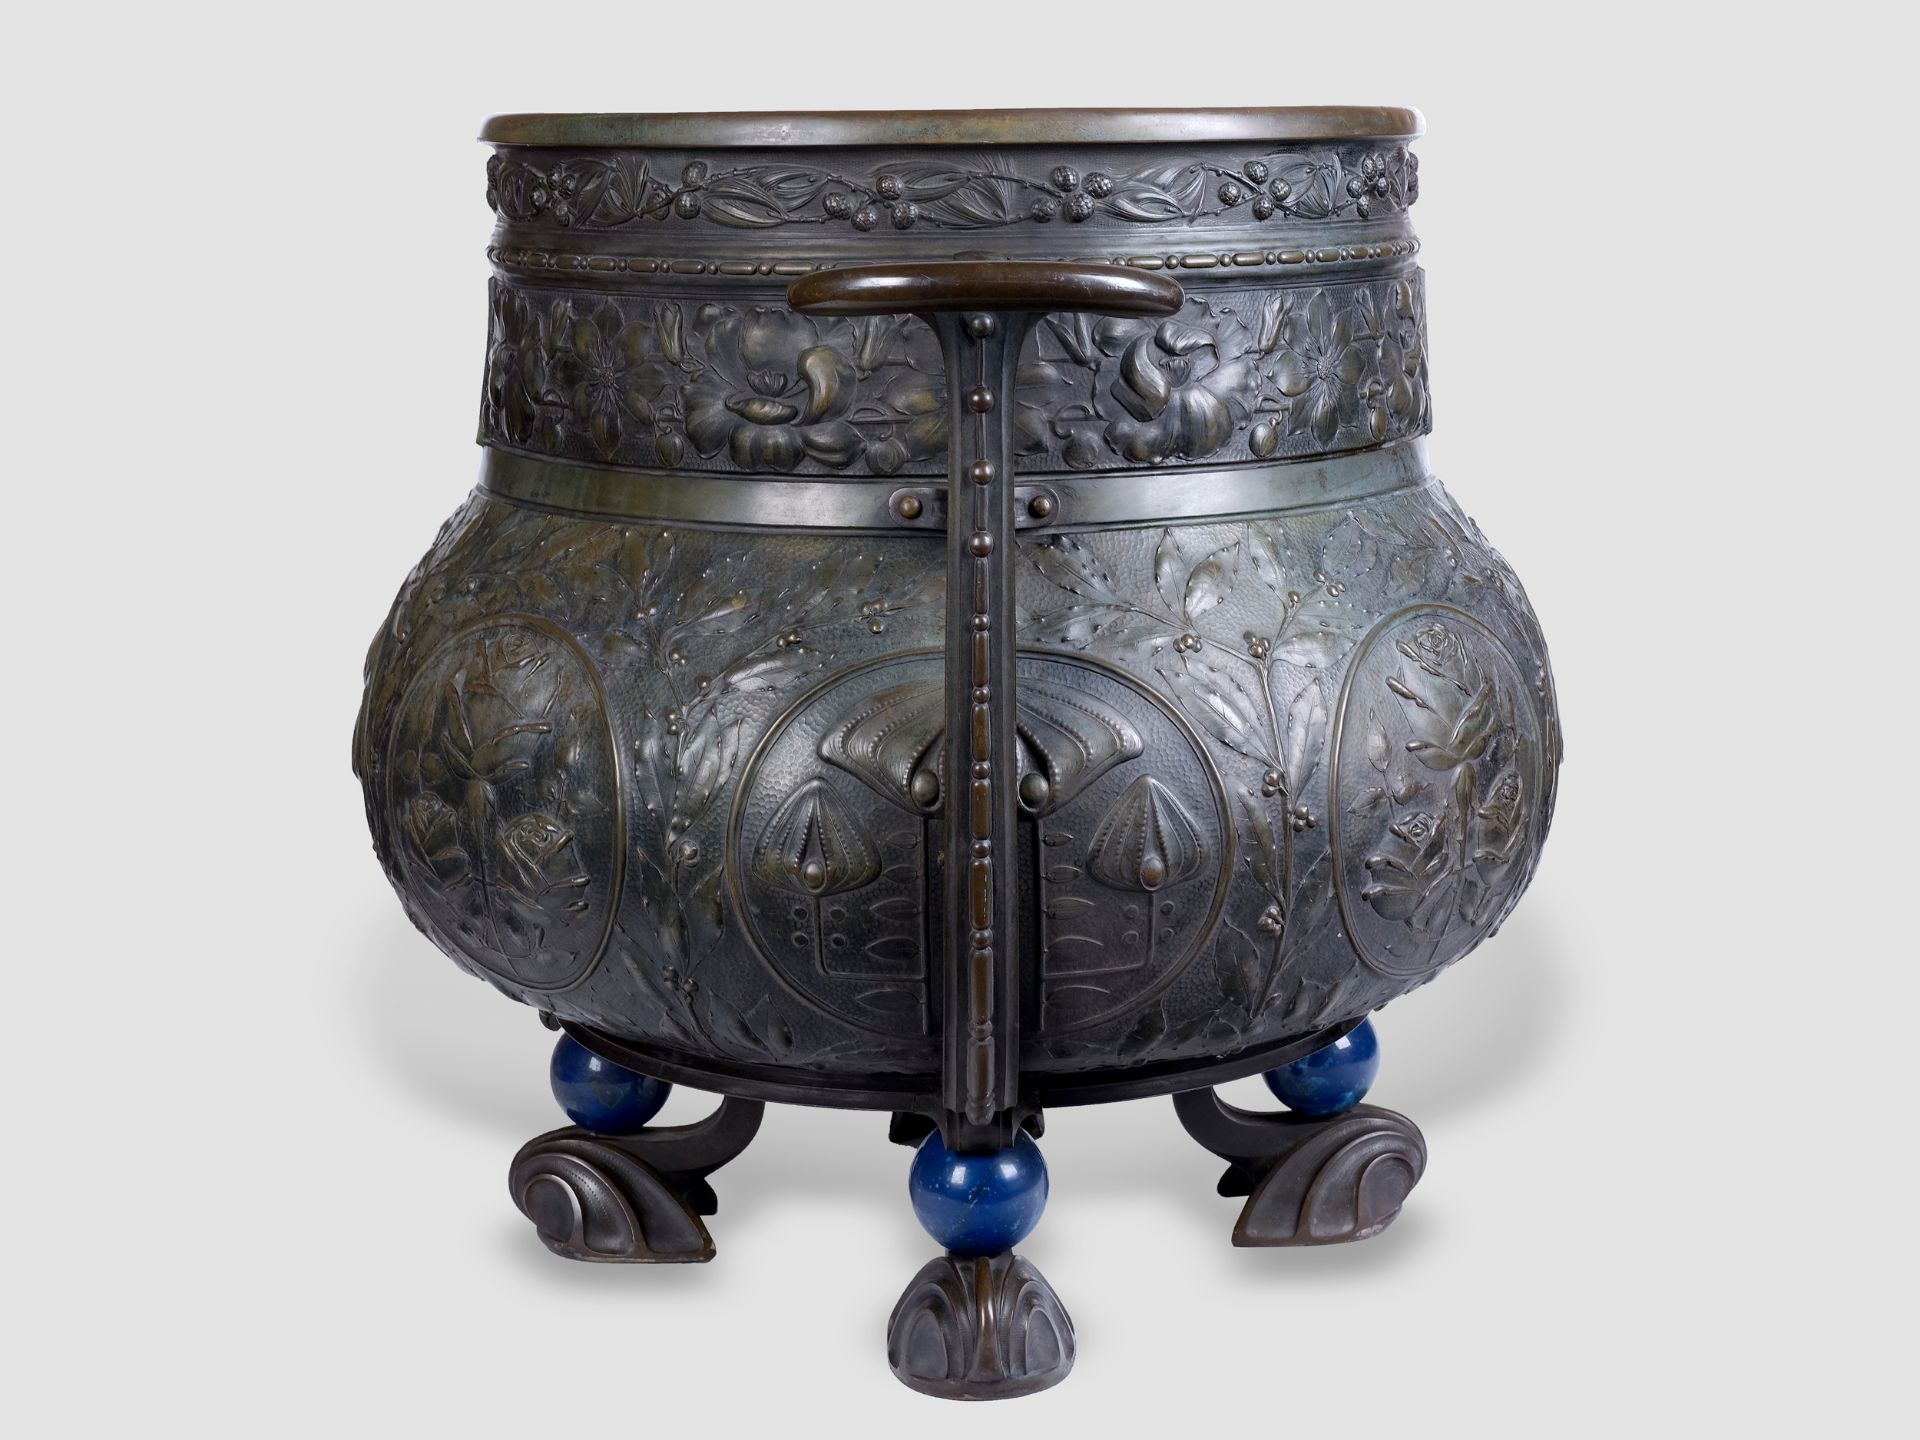 Highly important Russian planter, Modern style, Art Nuovo, Moscow around 1890/1900 - Image 3 of 12